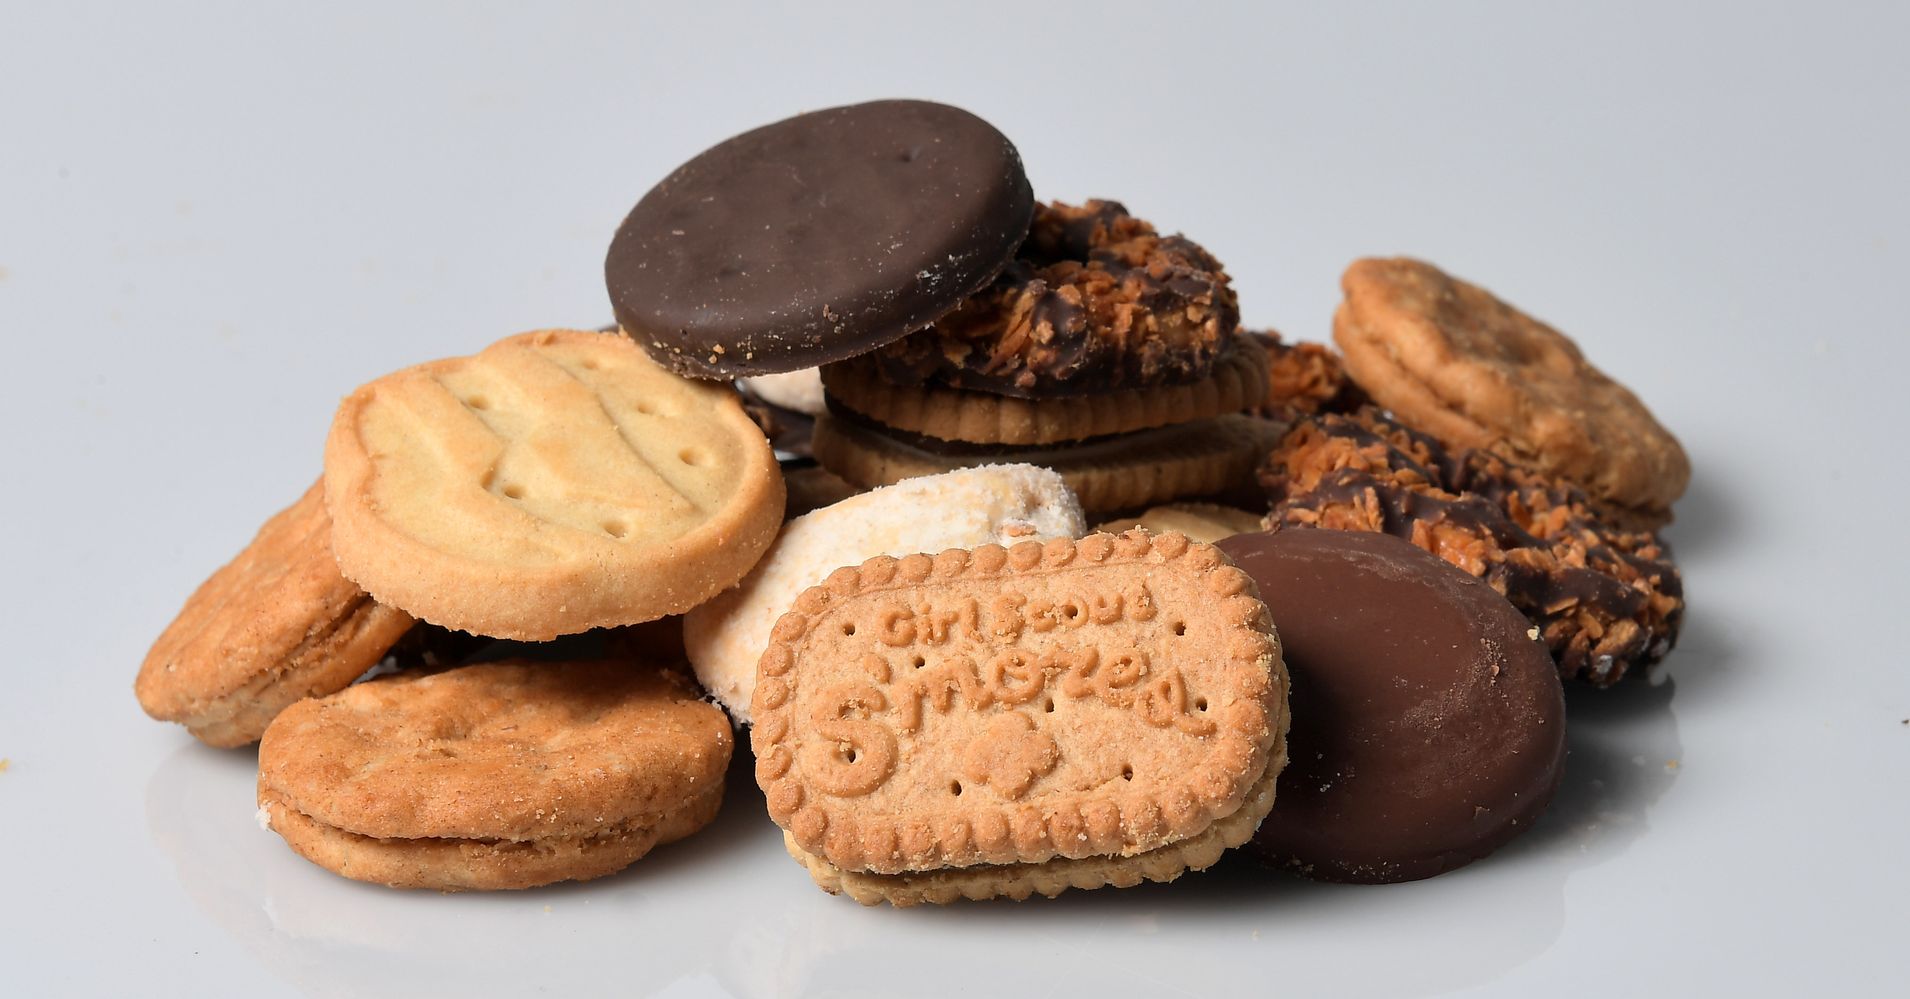 You Can Buy Girl Scout Cookies On Amazon, But Here's Why You Shouldn't